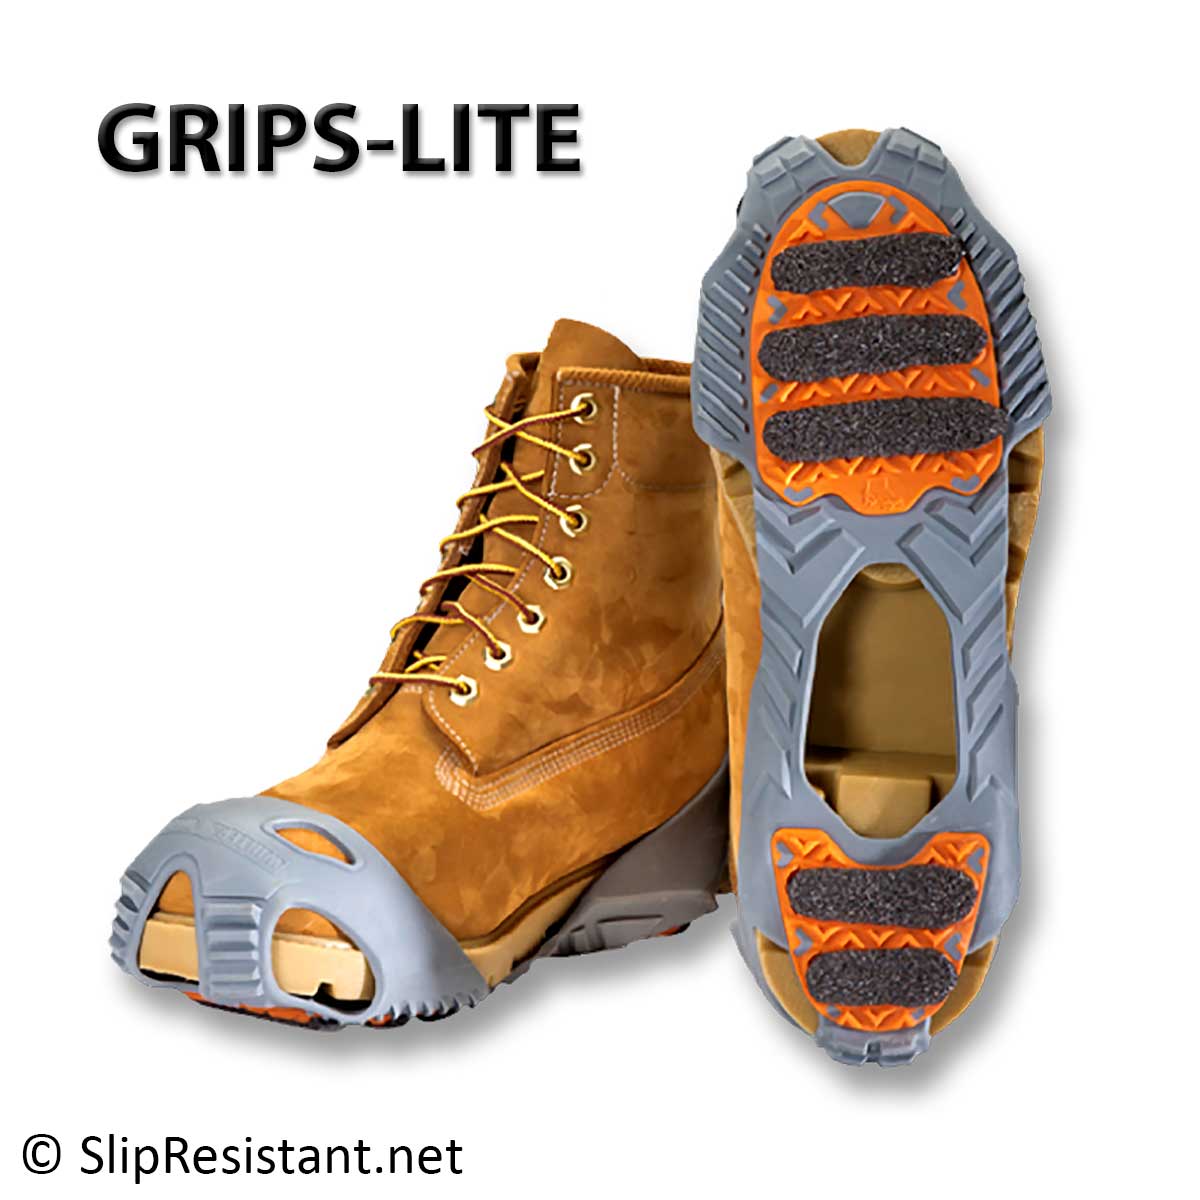 Winter Walking GRIPS-LITE Ice Cleats and Shoe Traction Device